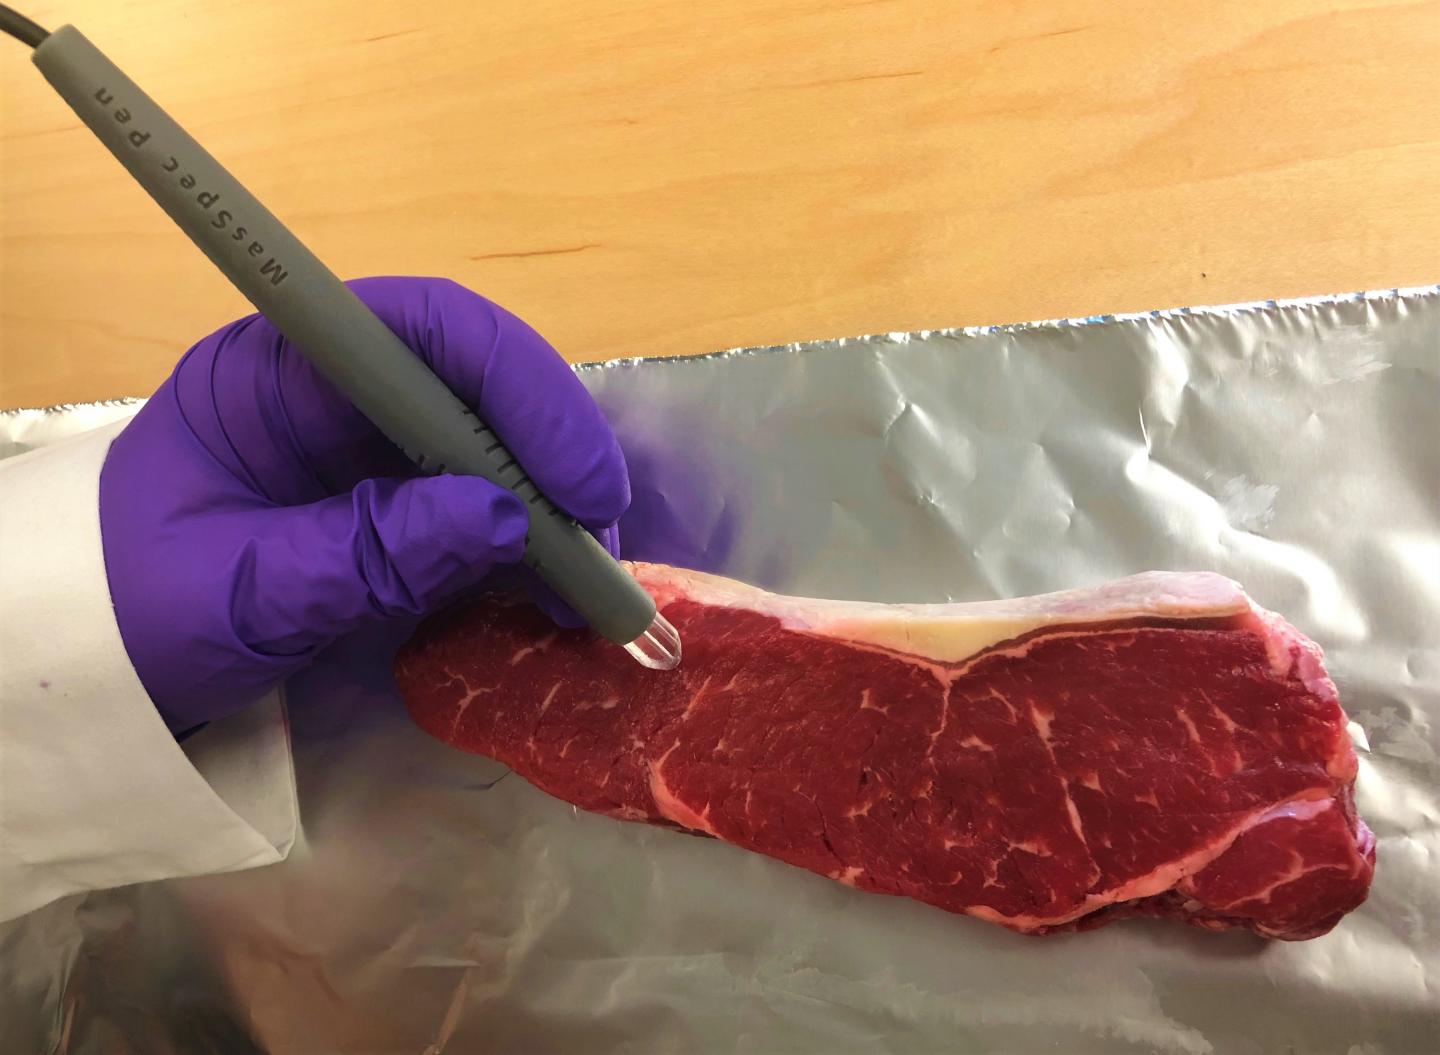 Revealing meat and fish fraud with a handheld 'MasSpec Pen' in seconds